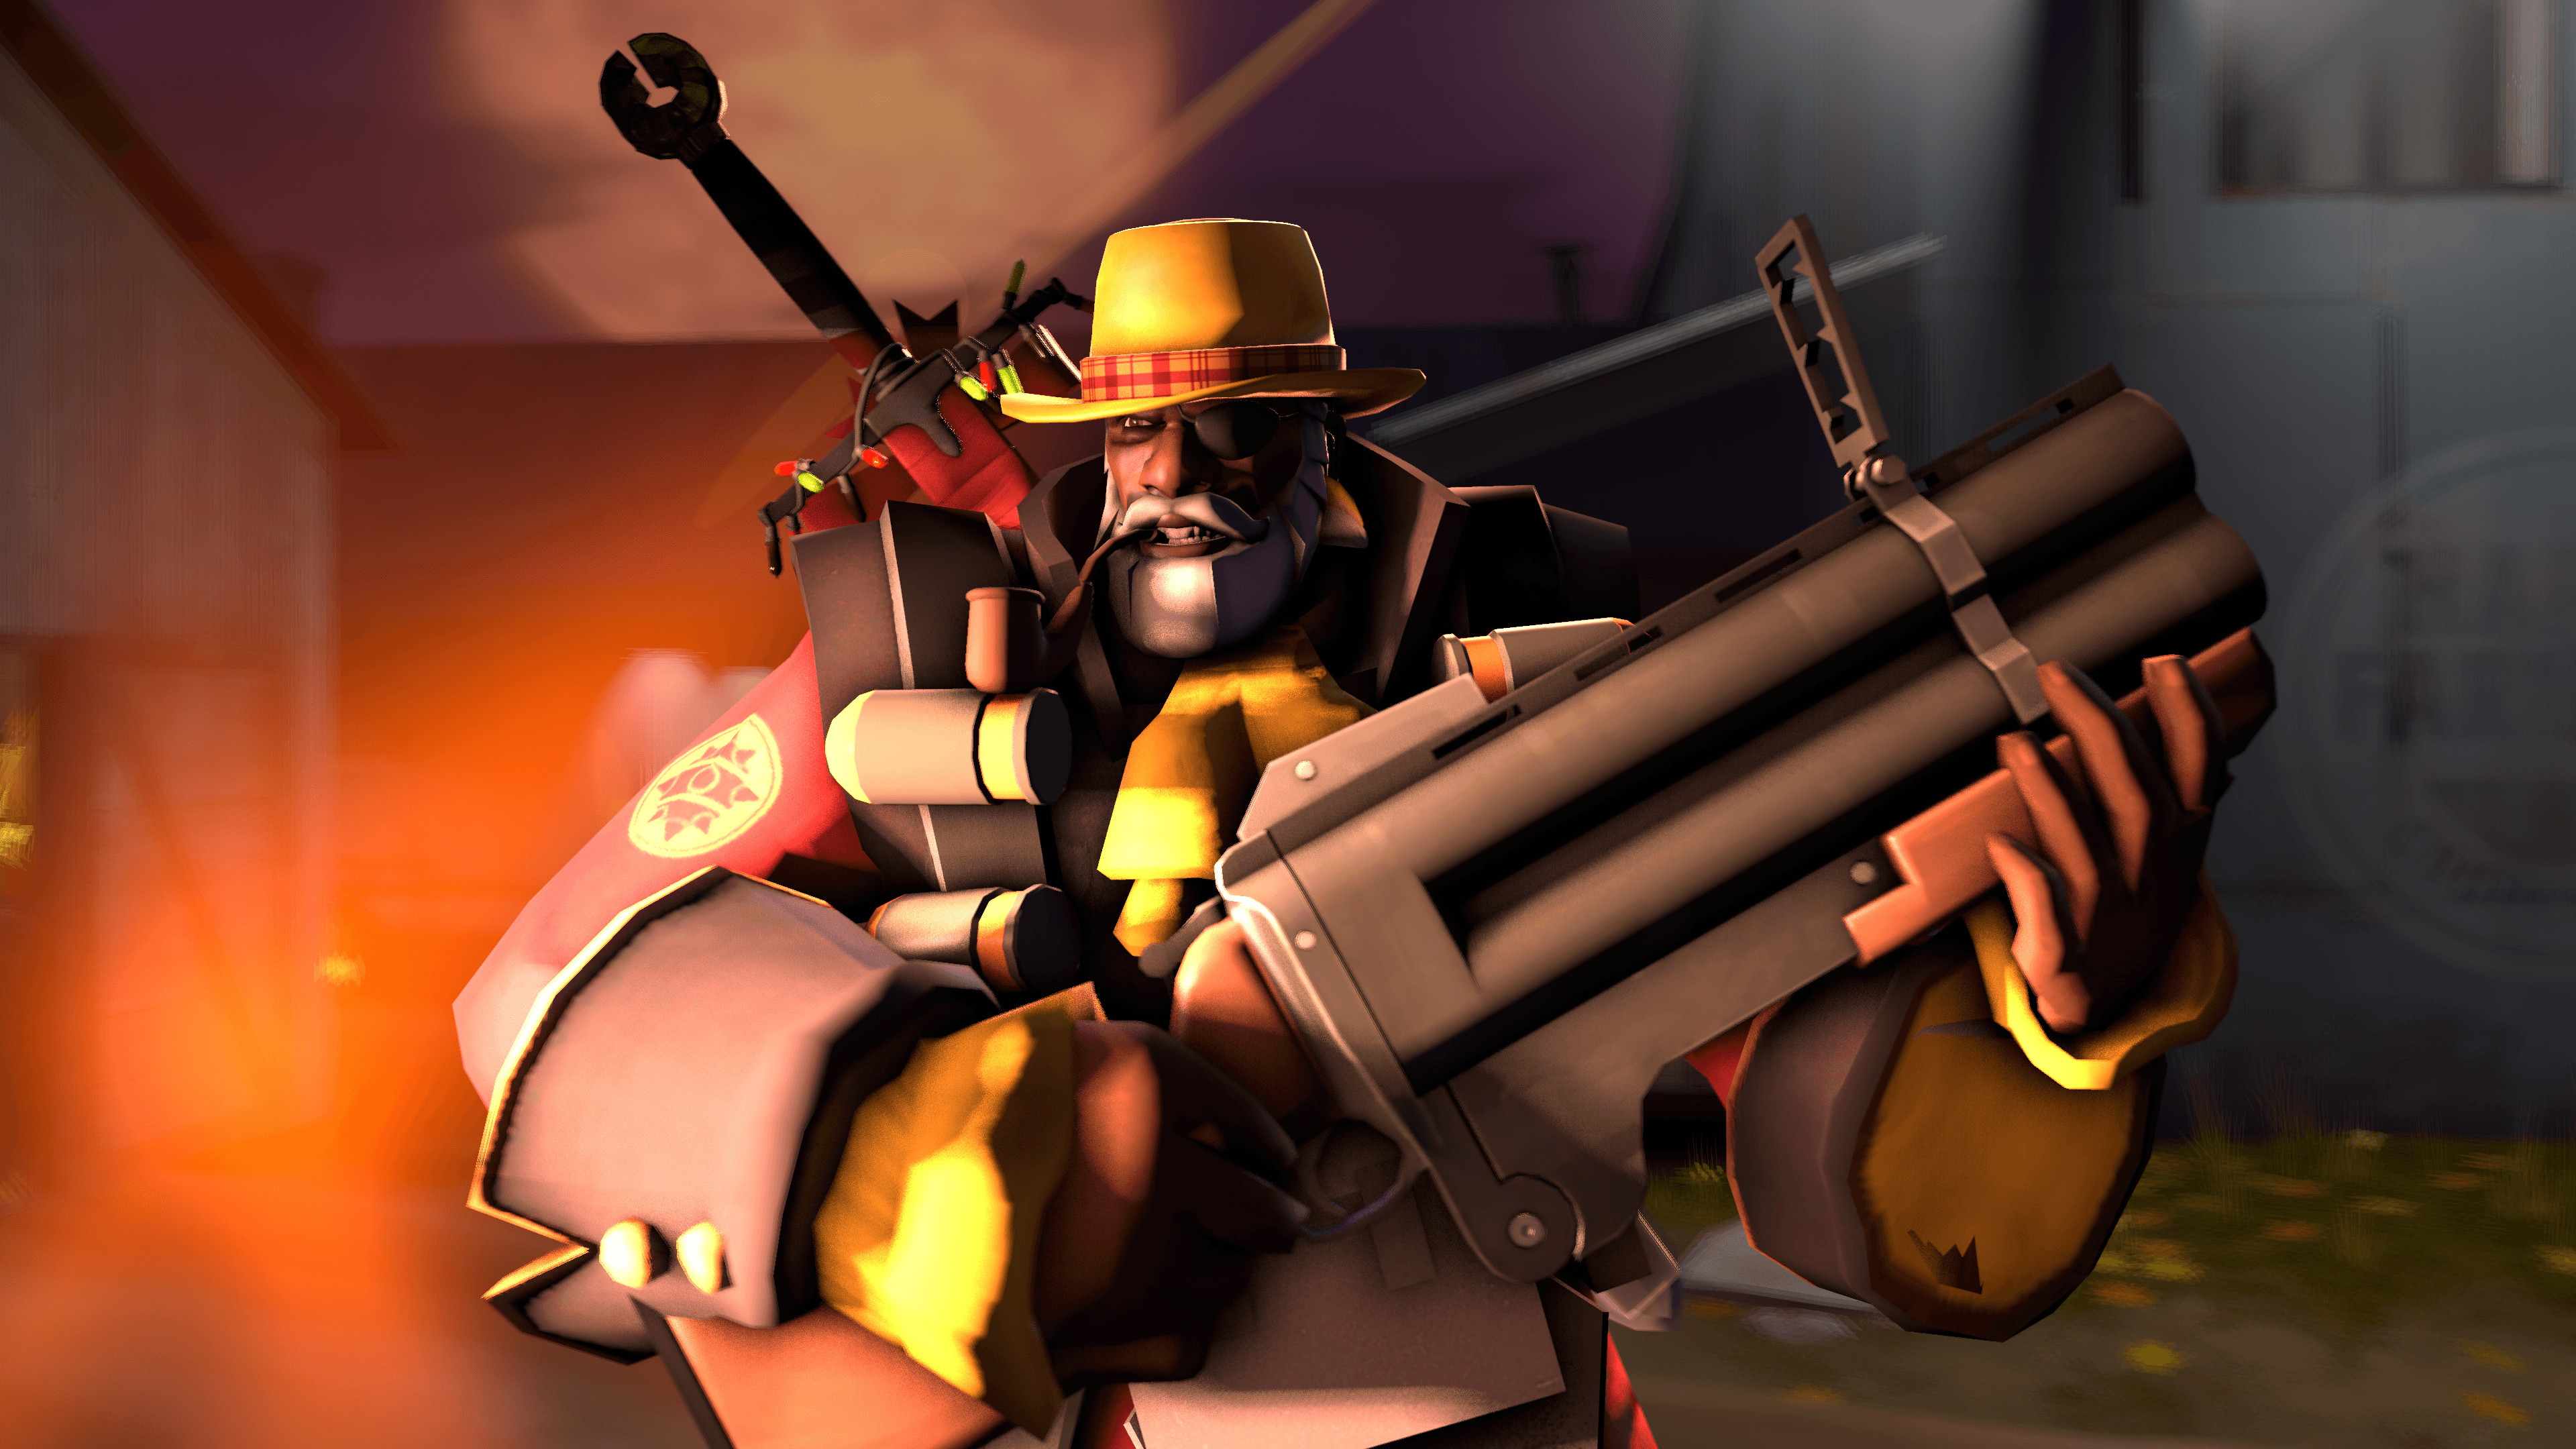 3840x2160 1600x1200 Tf2 Wallpapers, Cool Tf2 Backgrounds | 49 Superb Tf2 Wallpapers">